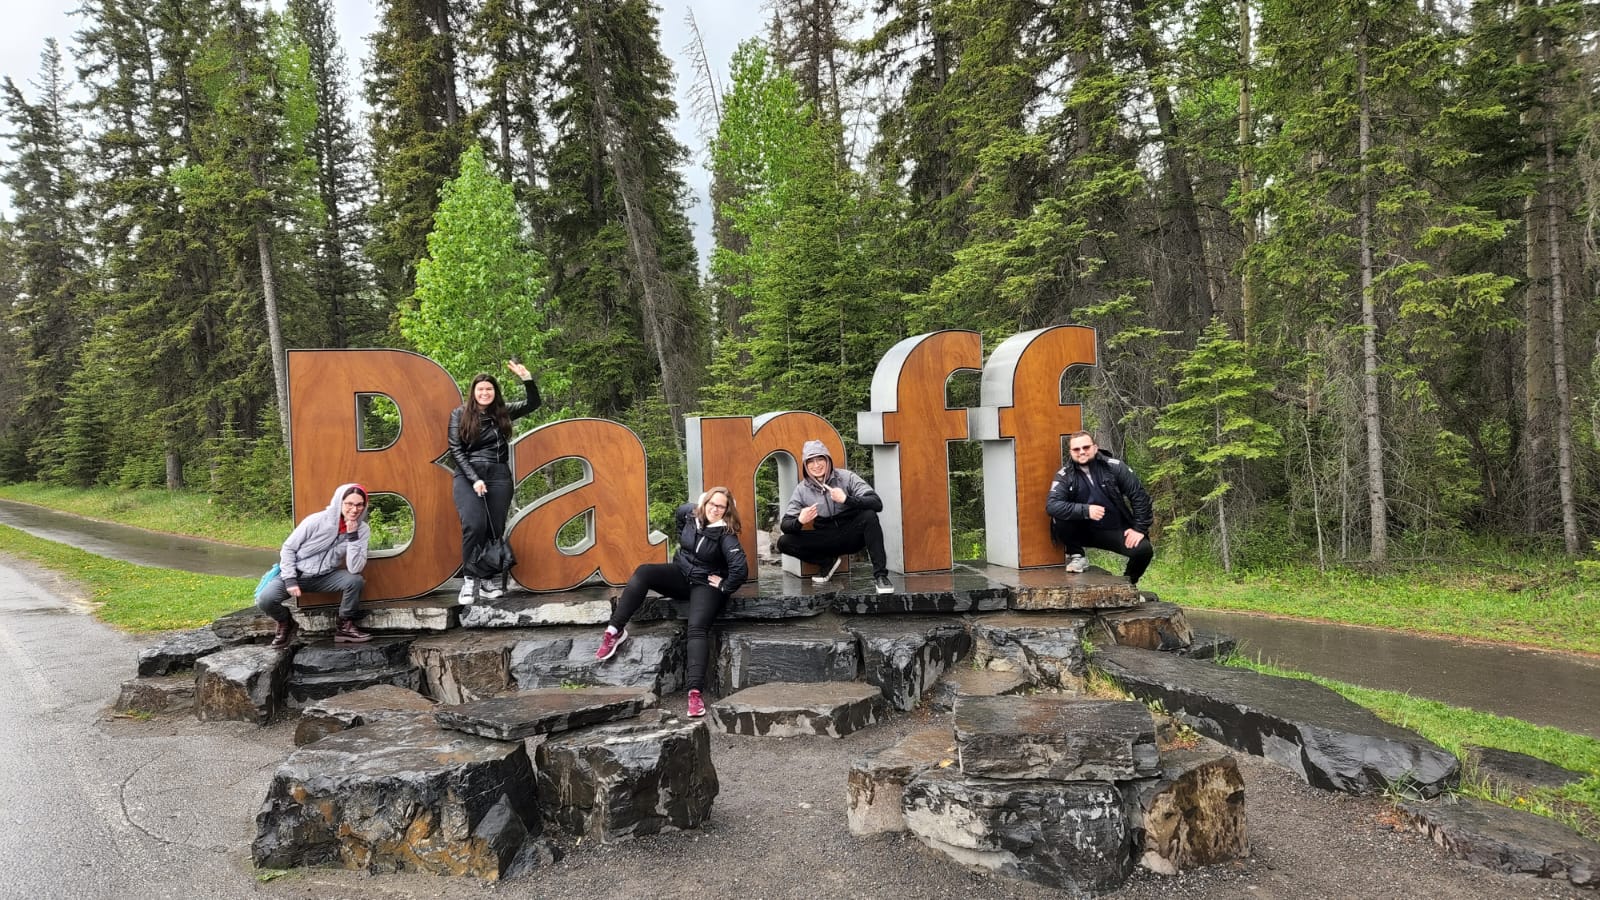 The Foucher Group standing in front of the Banff sign